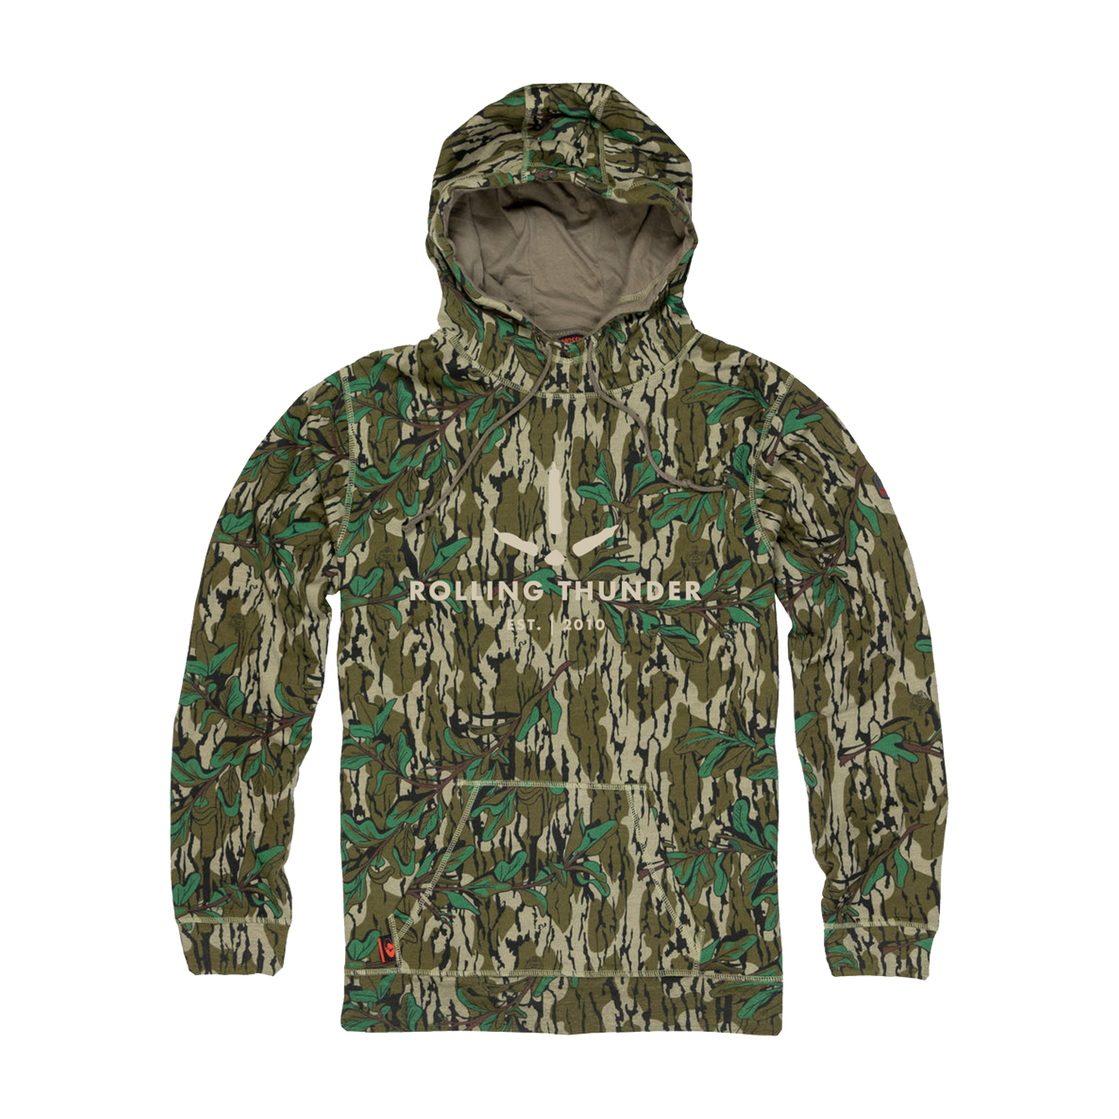 Great Lakes Loons 2023 Mossy Oak Hoodie – Great Lakes Loons Official Store